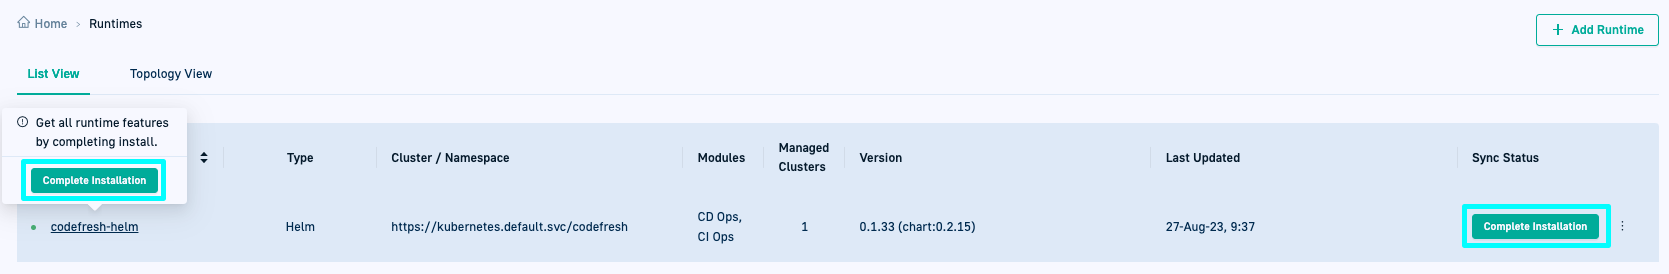 Newly installed Hybrid GitOps Runtime with Complete Installation notification